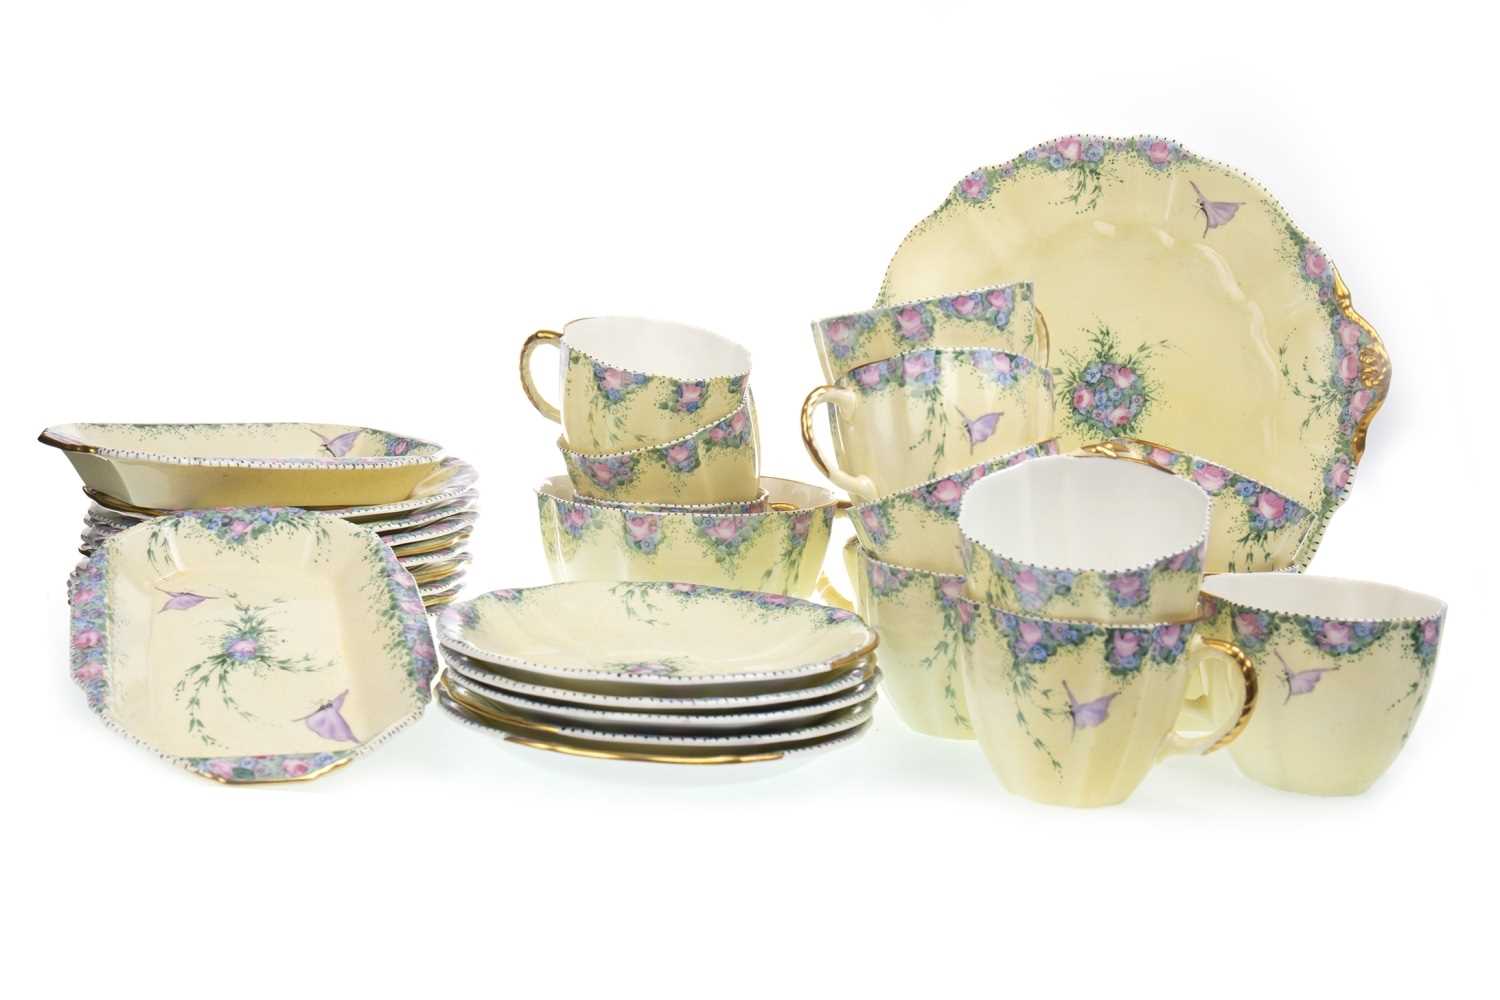 Lot 1283 - A ROYAL CROWN DERBY HAND-PAINTED TEA SERVICE